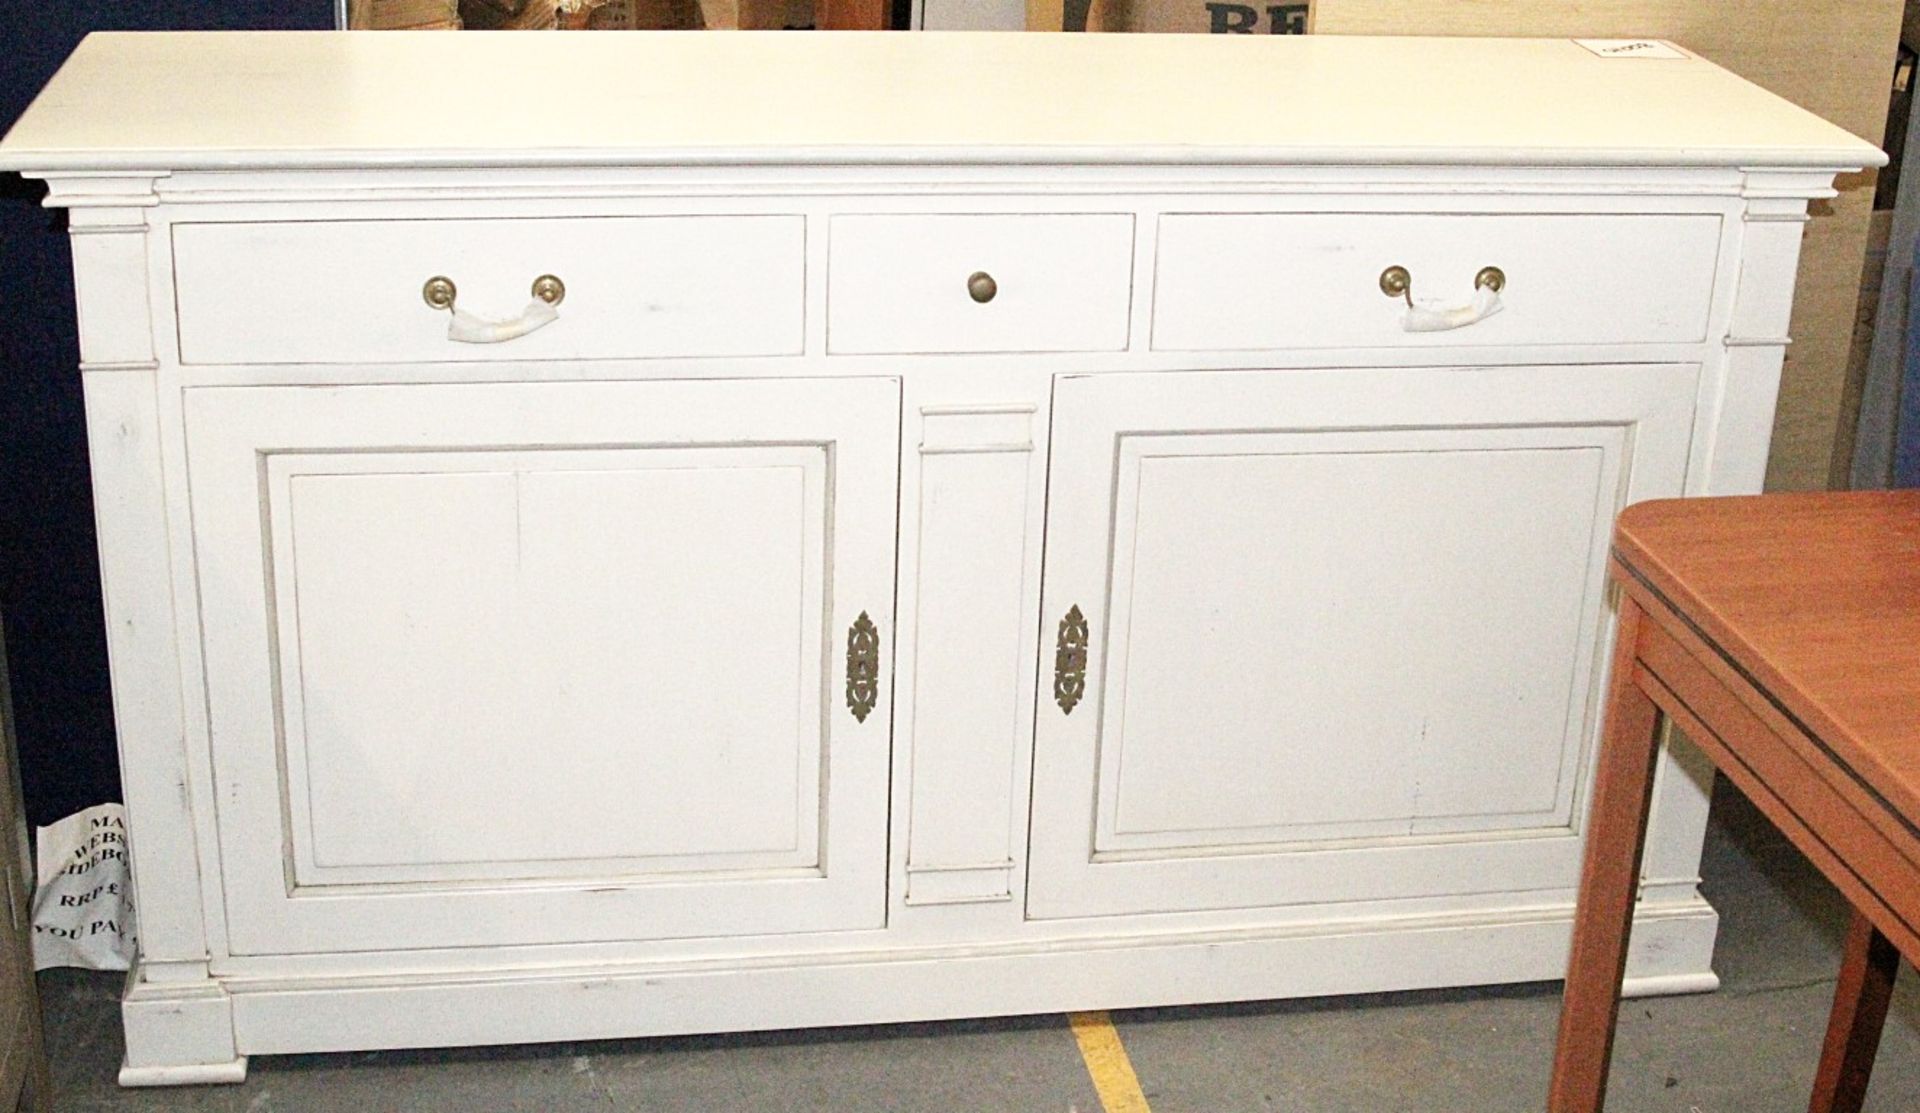 1 x Shabby-Chic Cream Sideboard – 3 Drawer / 2 Door – Ref CH008 - 6ft Wide – Ex Display Stock In